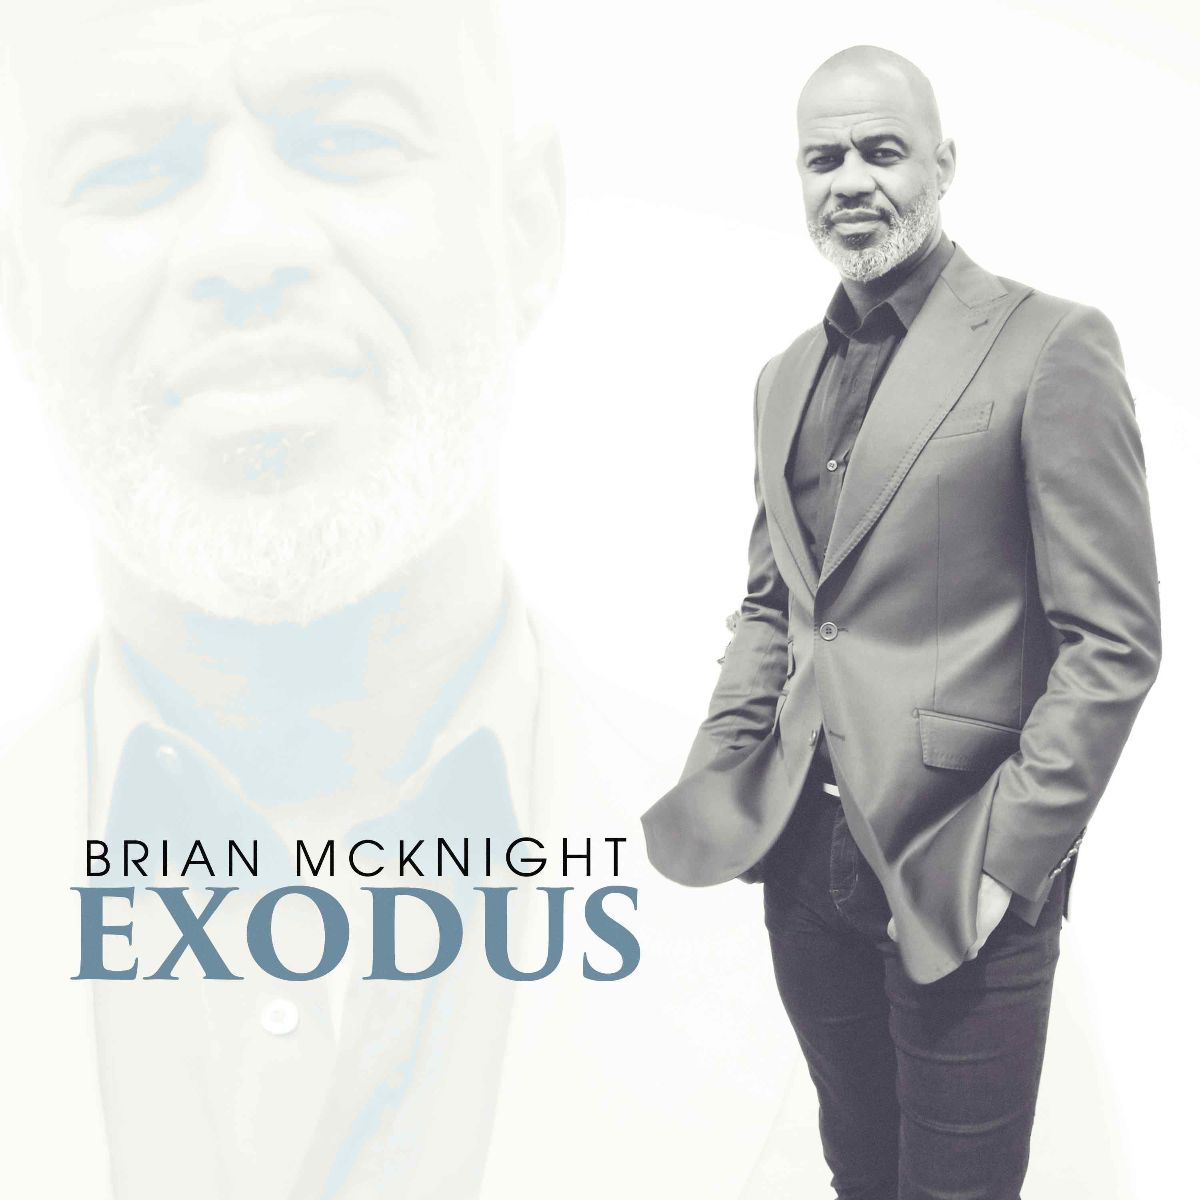 Brian McKnight Reveals Cover Art & Release Date for Final Album "Exodus" + Releases New Single "Bad"